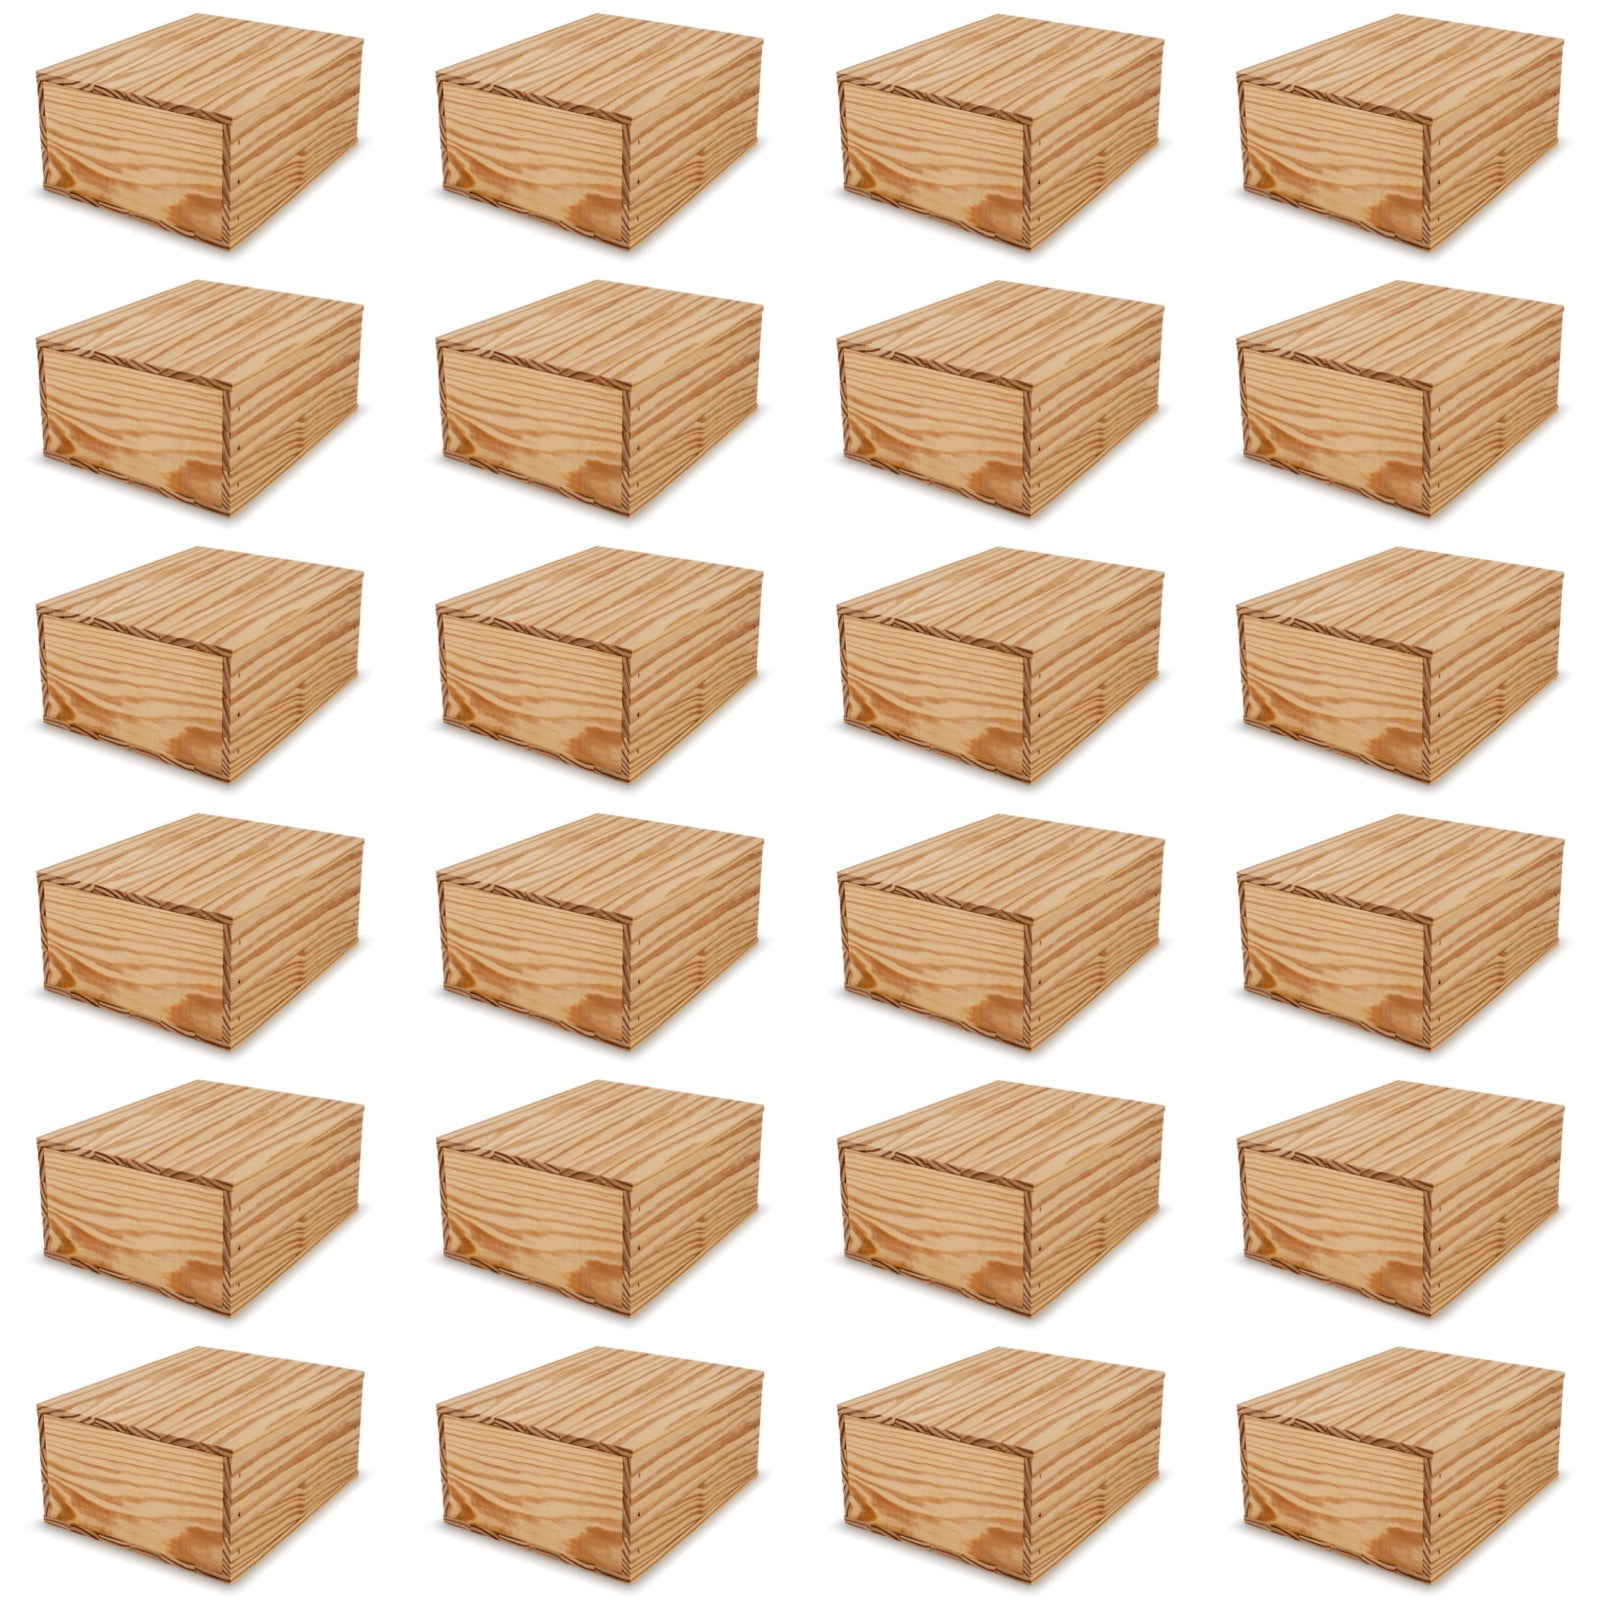 24 Small wooden crates with lid 9x8x3.5